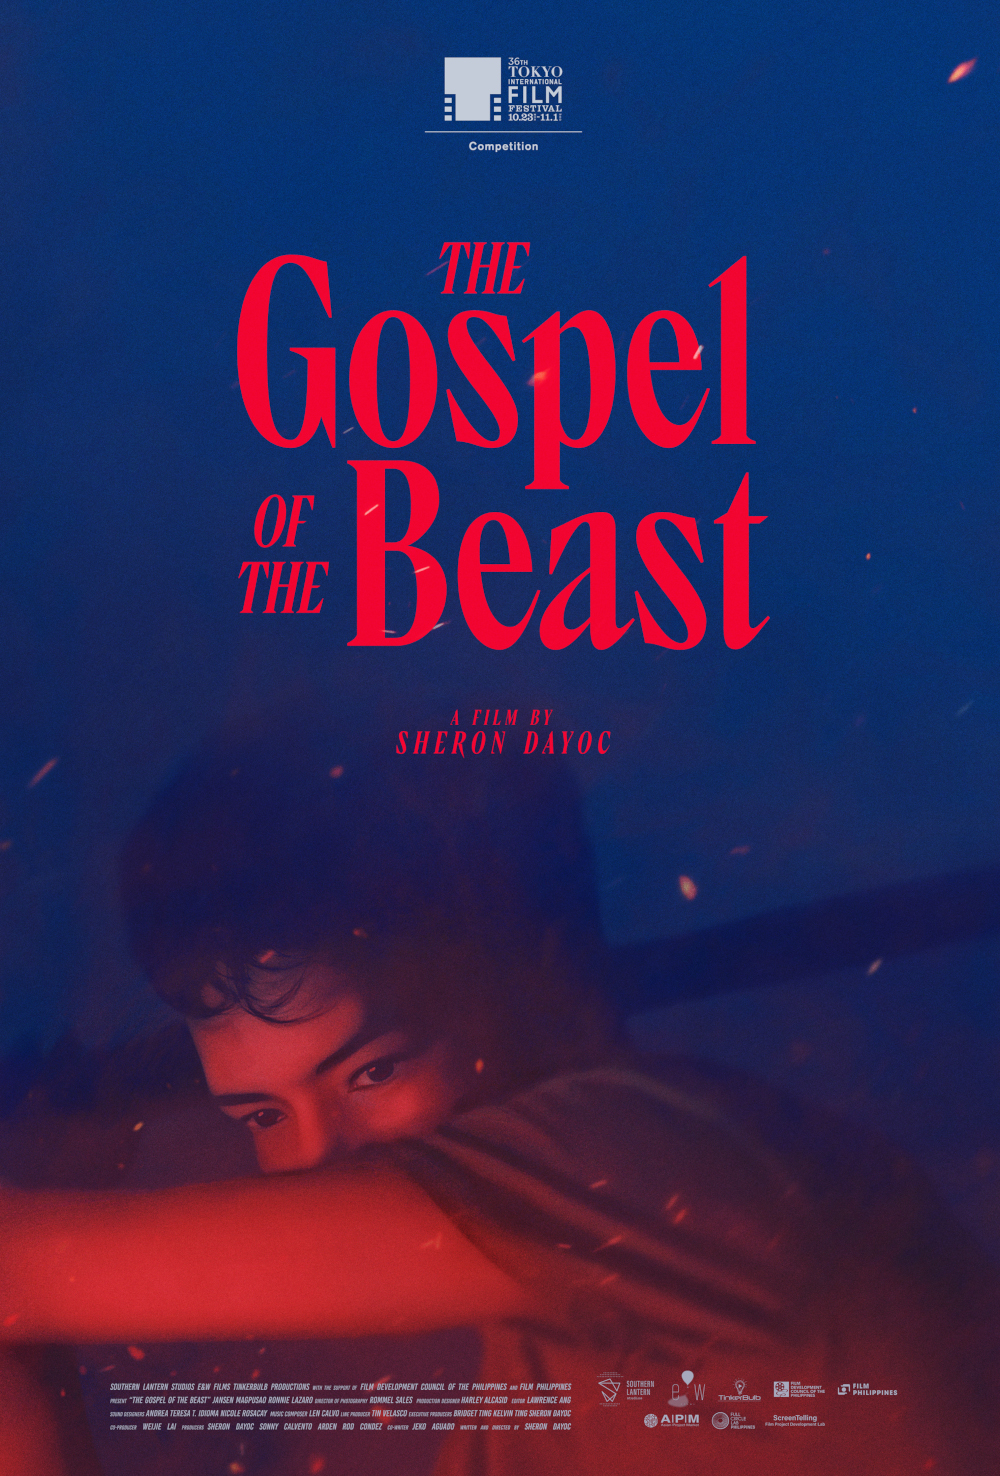 The Gospel of the Beast by Sheron Dayoc